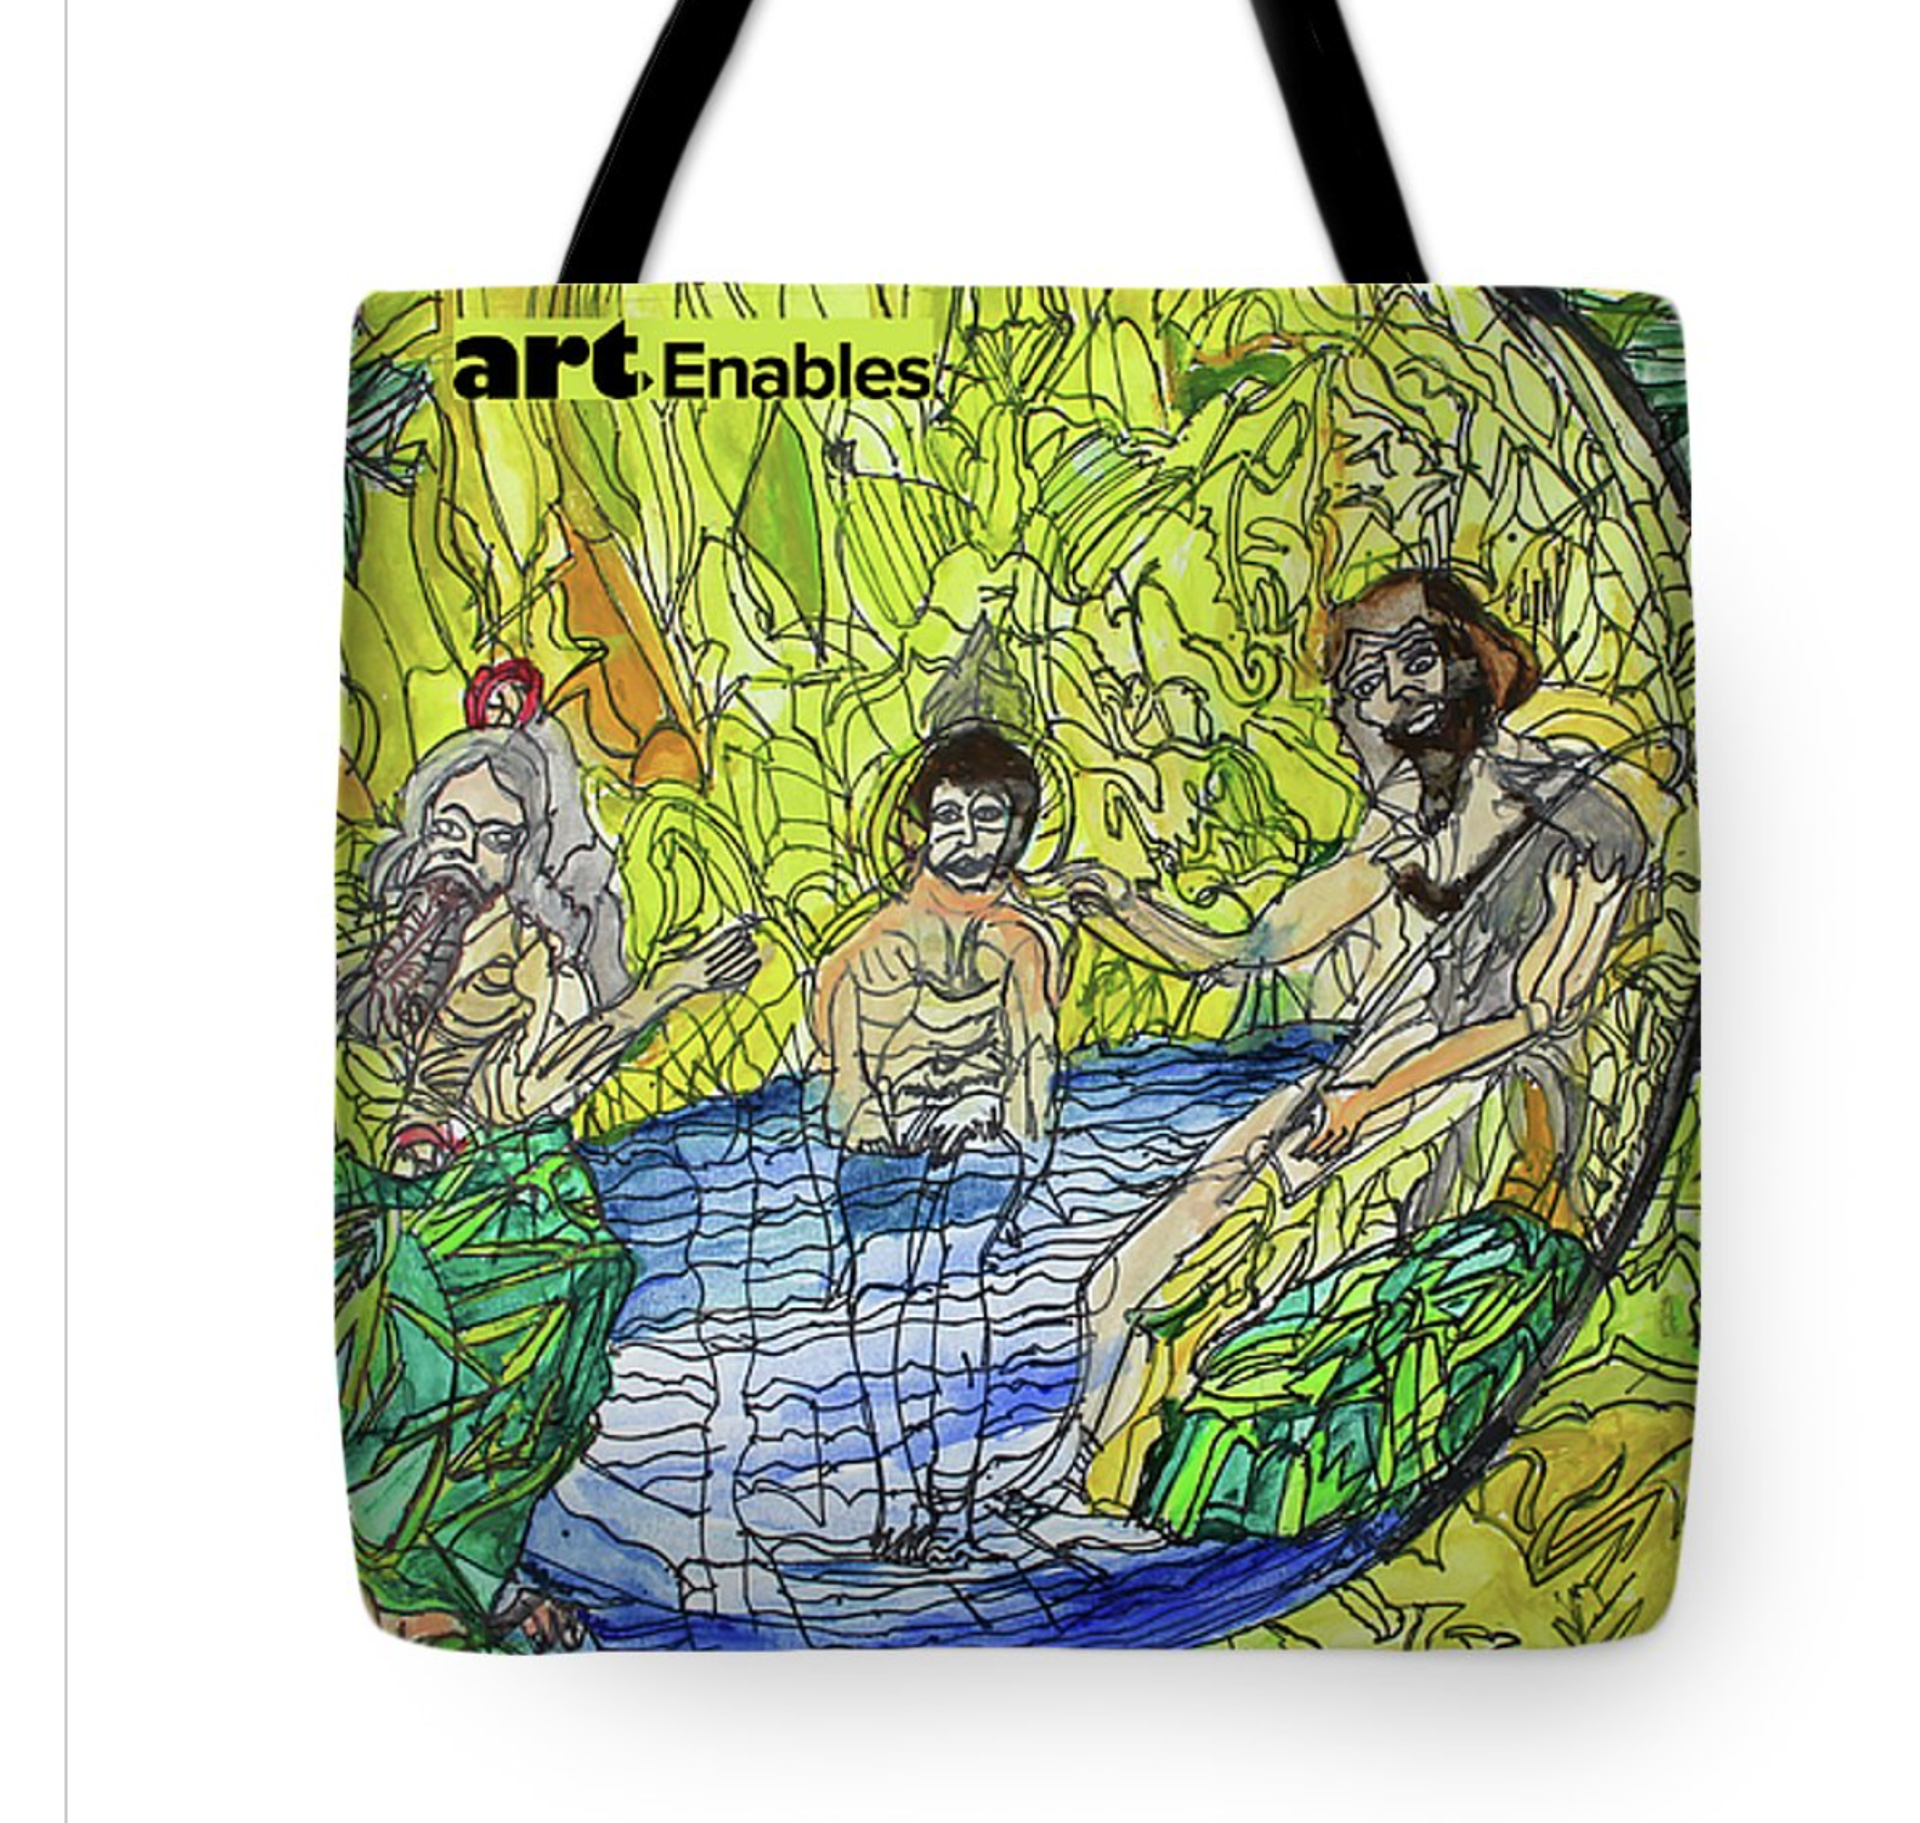 Tote Bag - Raymond Lewis by Art Enables Merchandise